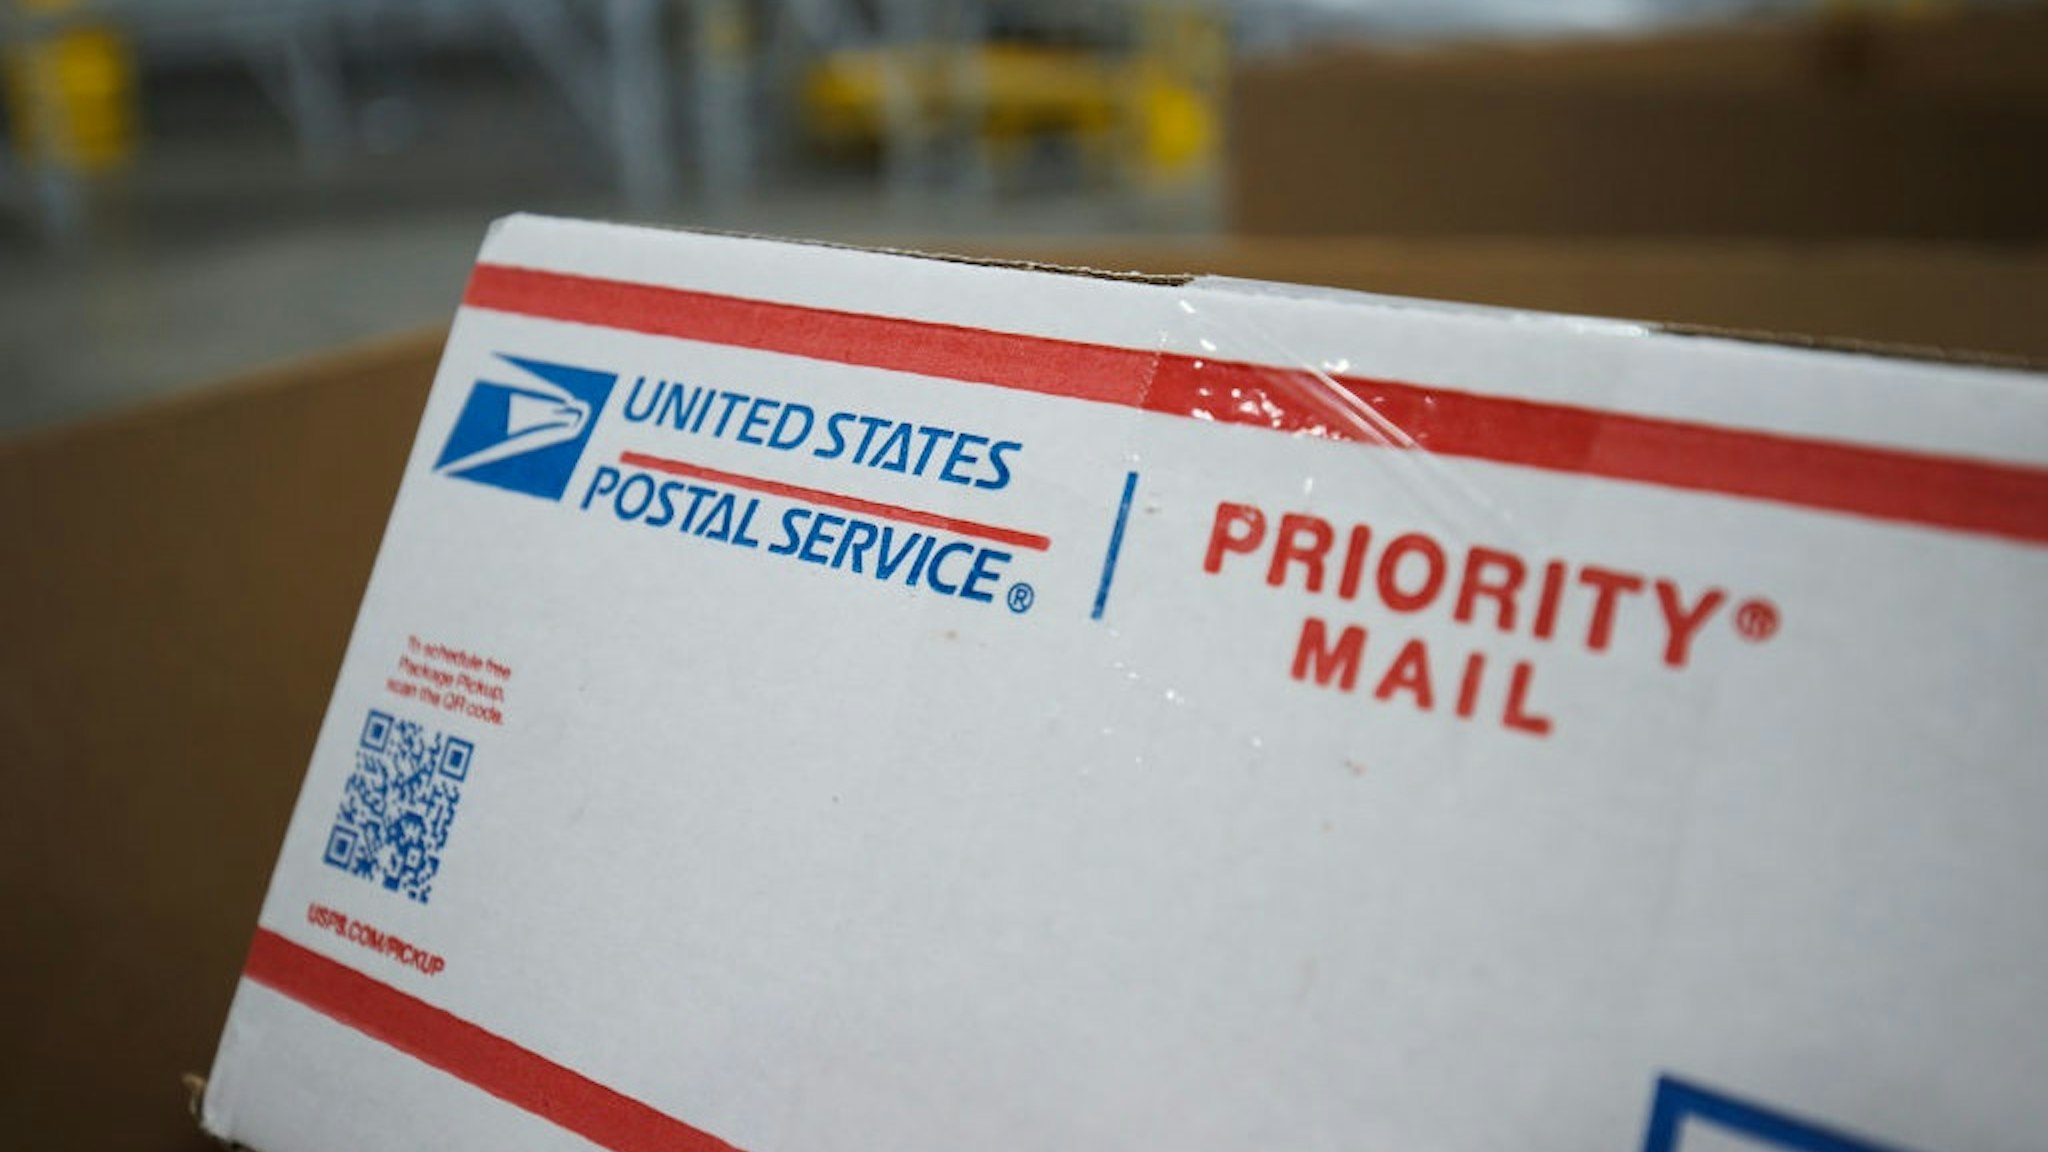 LA VERGNE, TN - NOVEMBER 04: Detail view of the USPS logo on a piece of priority mail packaging during a media tour of a United States Postal Service package support annex on November 4, 2021 in La Vergne, Tennessee.